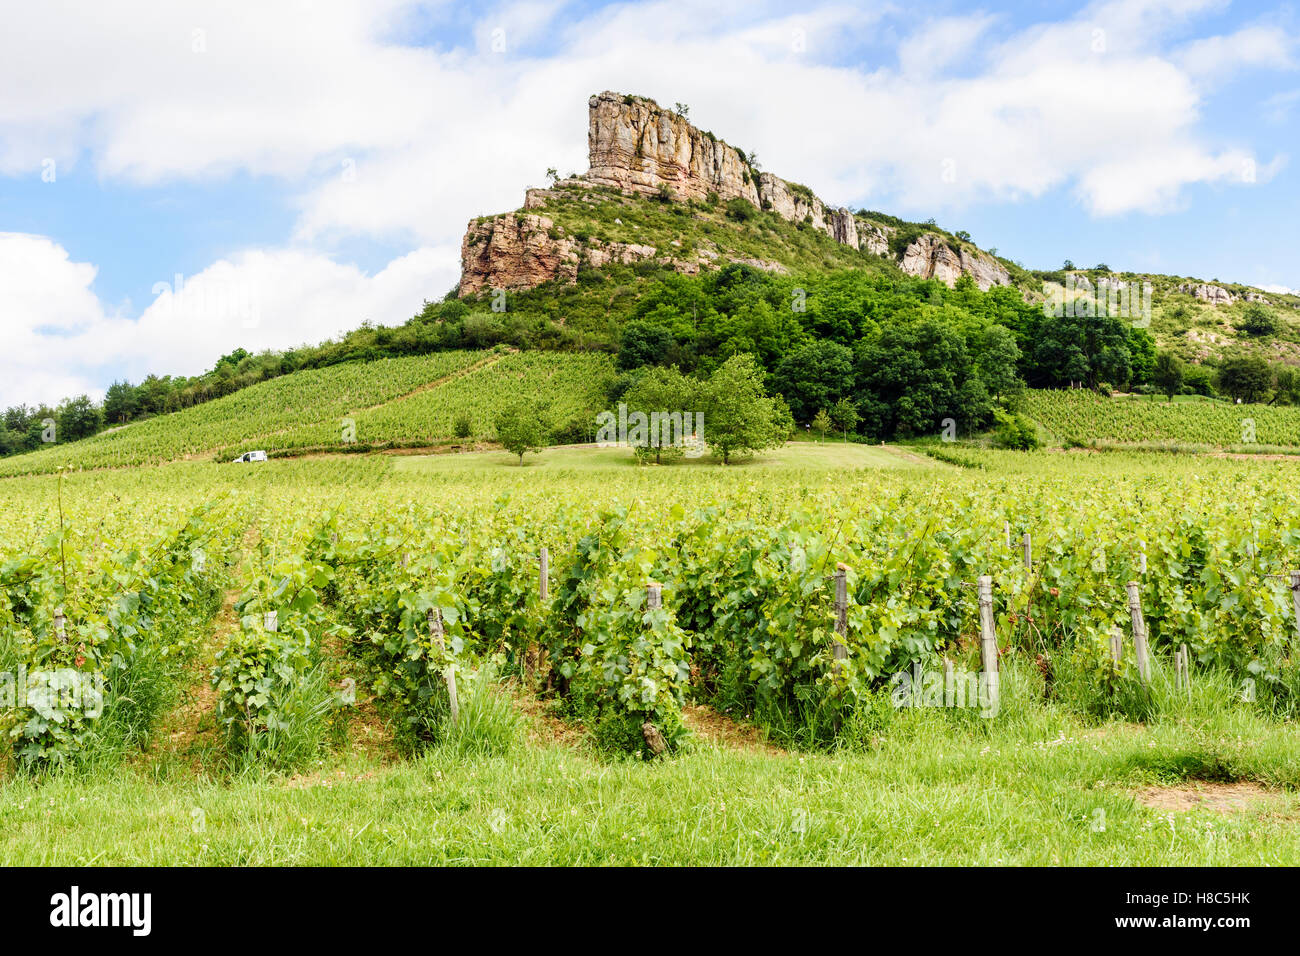 The limestone escarpment known as the Rock of Solutré, overlooking the vineyards of Solutré-Pouilly in Southern Burgundy, France Stock Photo